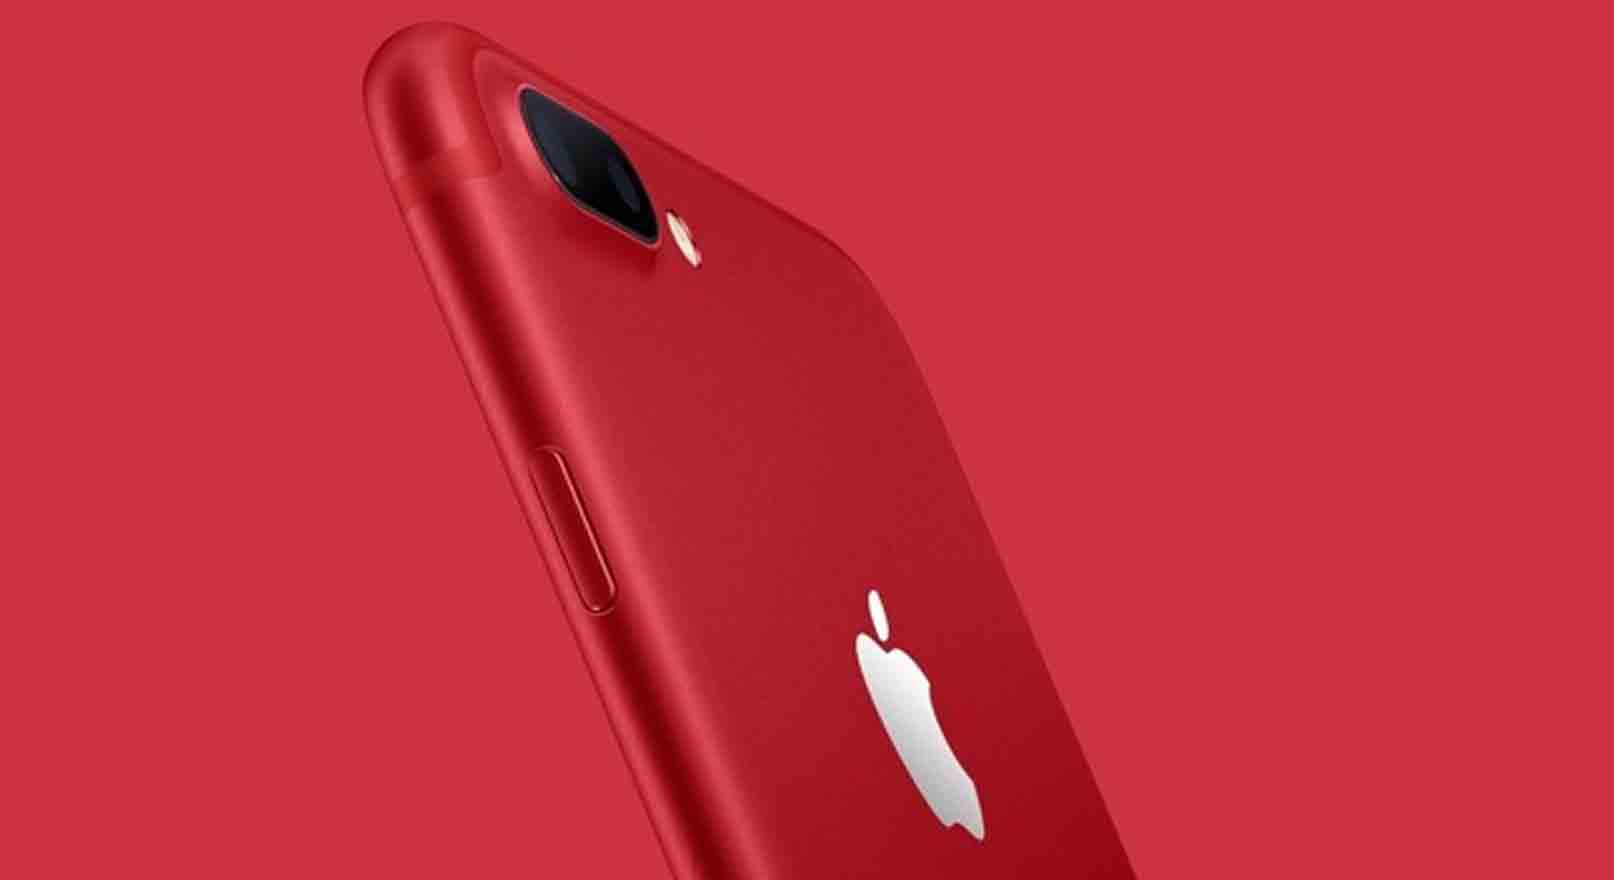 World AIDS Day: Apple Raises Over $160 Million Via Sales Of RED Products